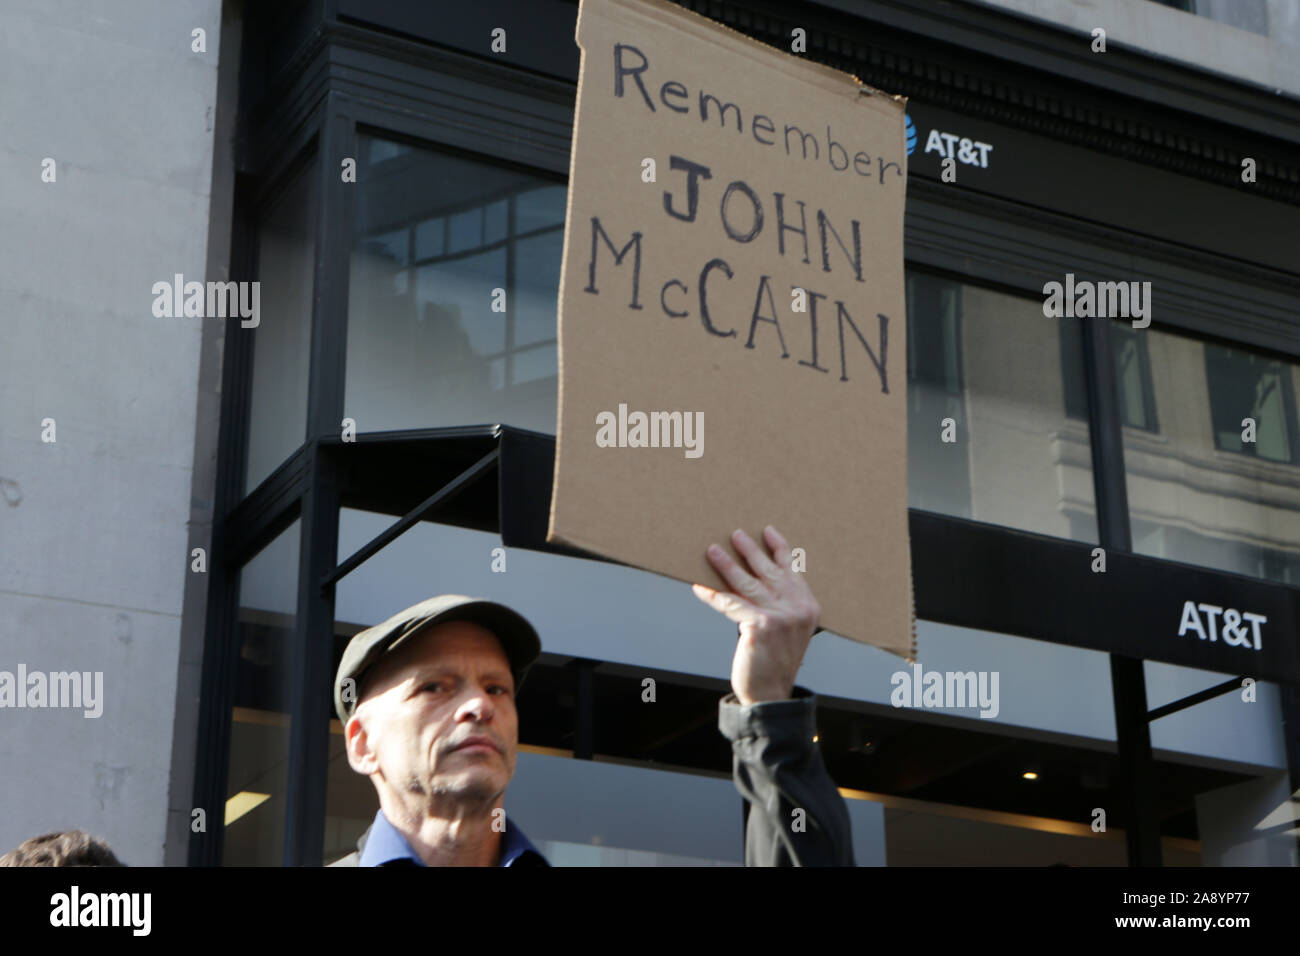 New York, New York, USA. 11th Nov, 2019. Anti-Trump Demonstrater attends the New York City 100th Veterans Day Parade held along 5th Avenue on November 11, 2019 in New York City. Credit: Mpi43/Media Punch/Alamy Live News Stock Photo